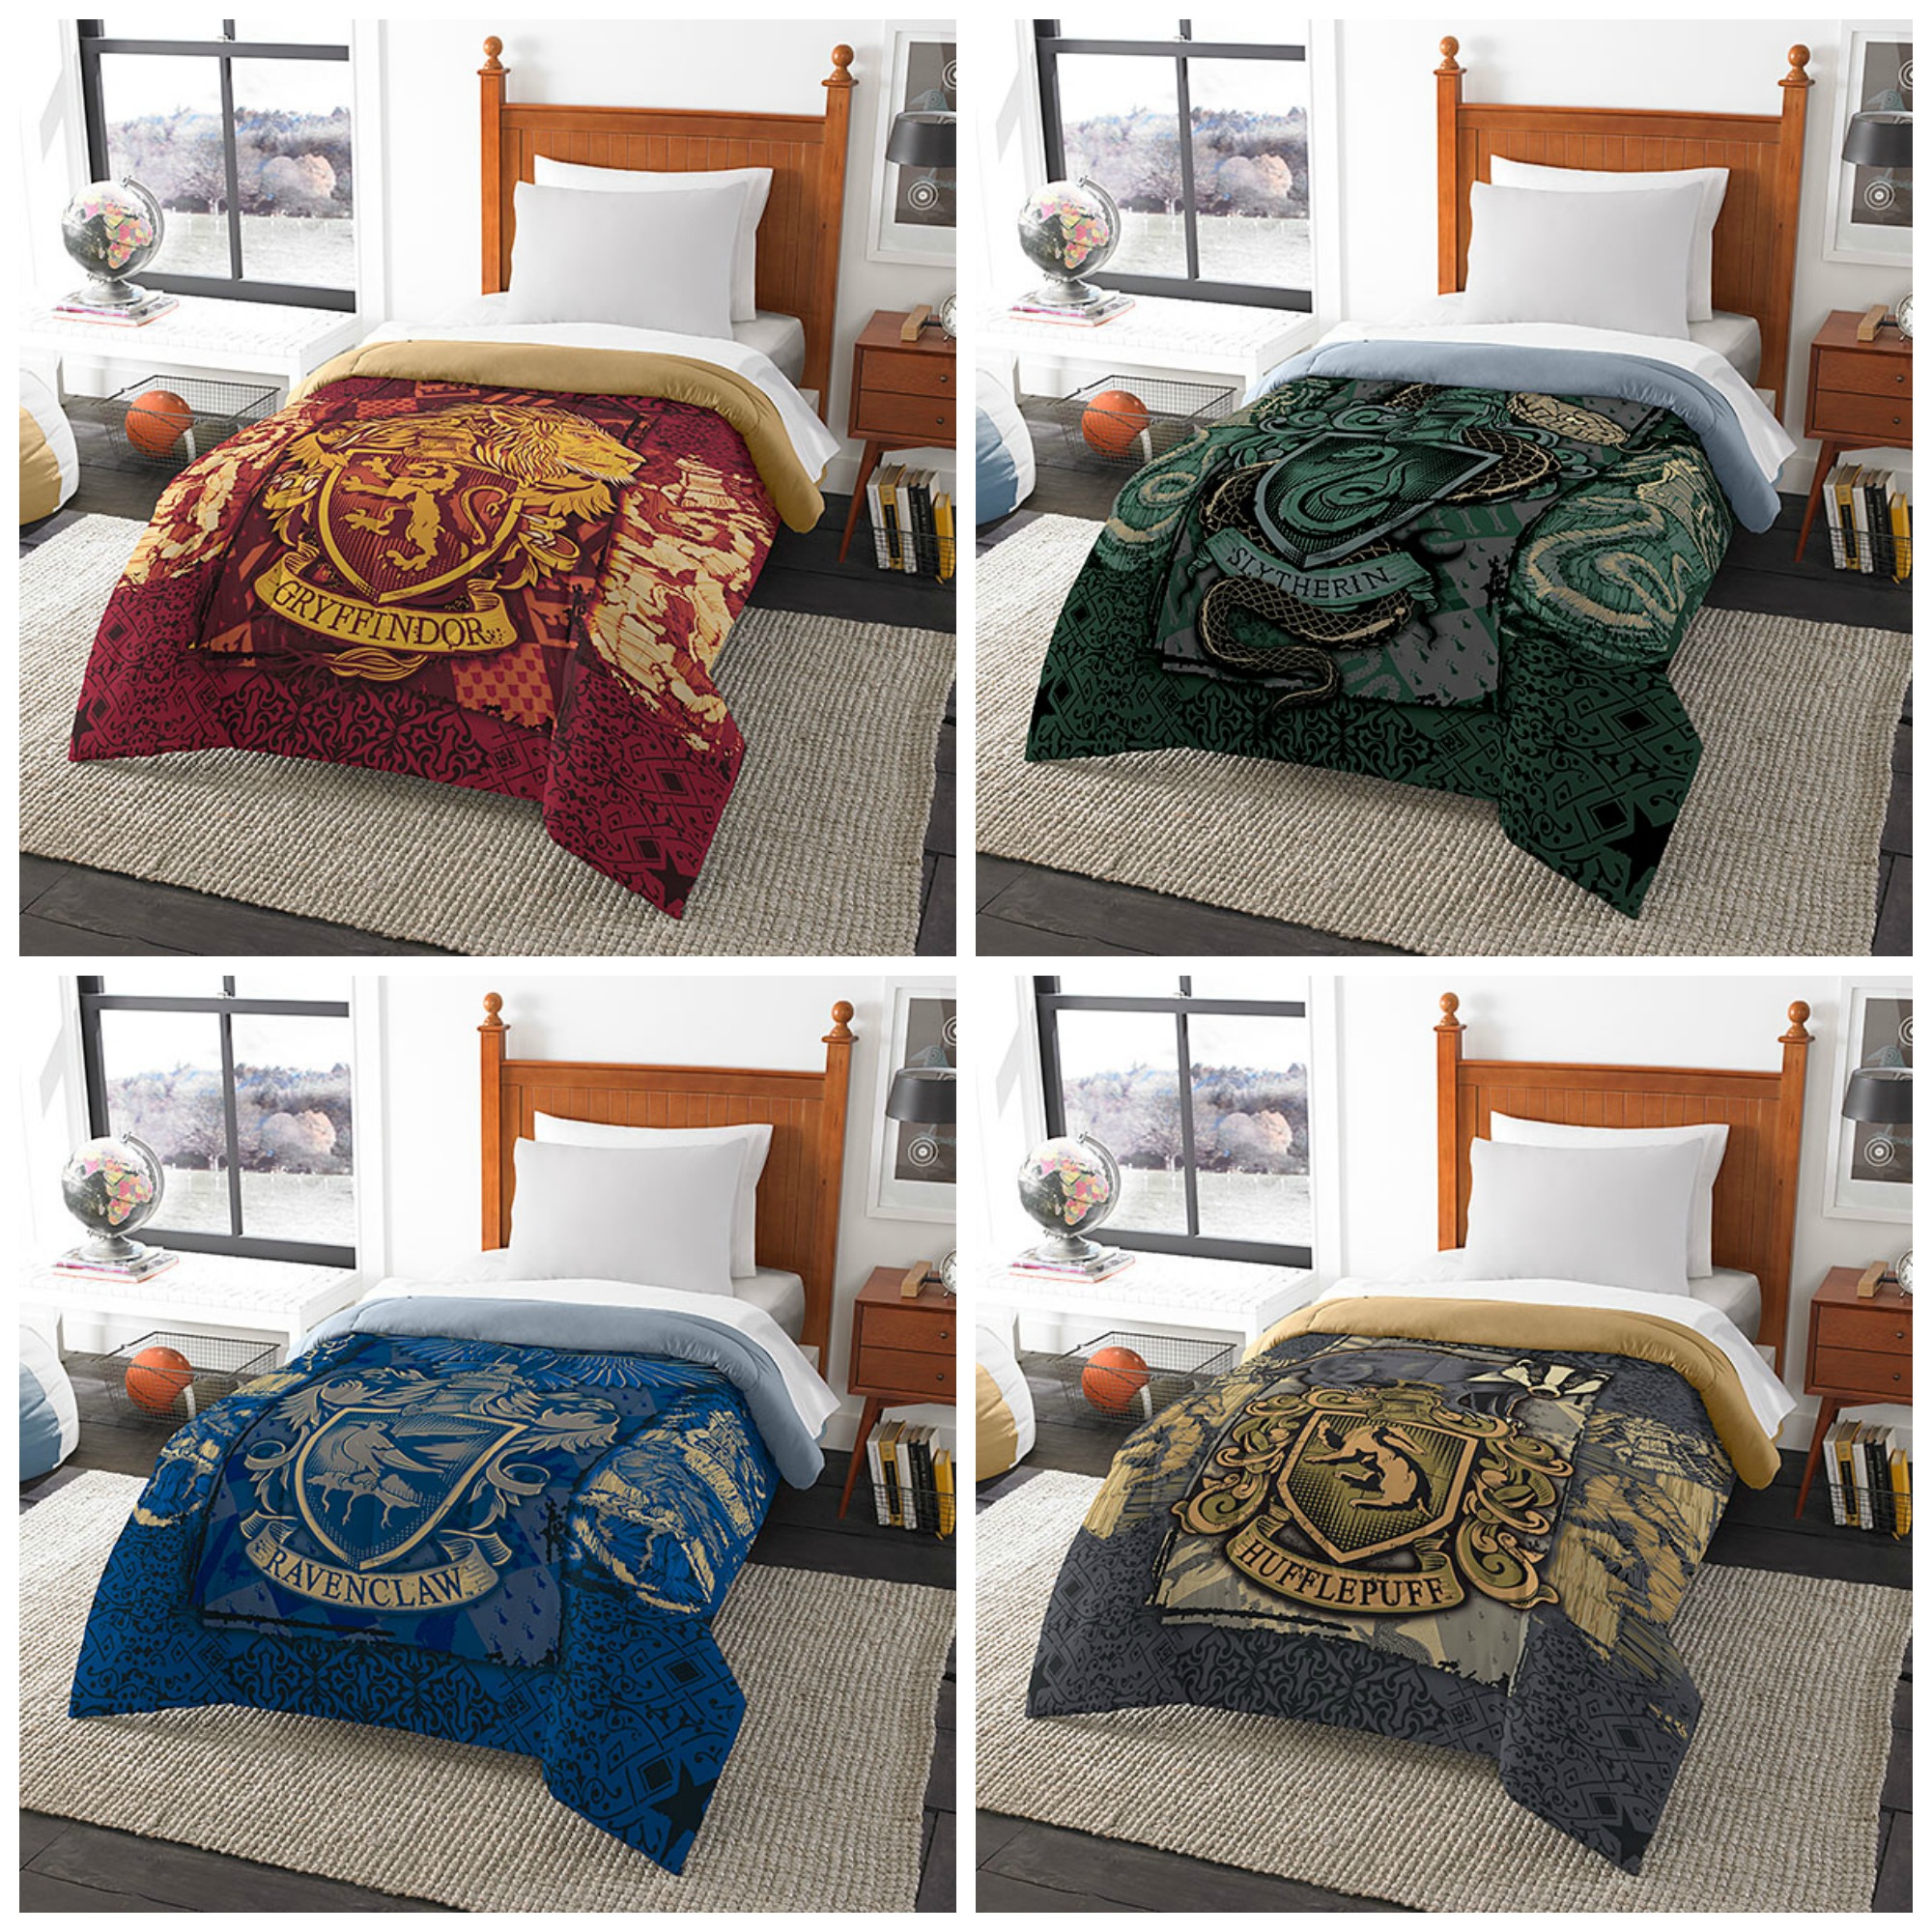 Harry Potter House Comforters Starting At 47 99 Perfect